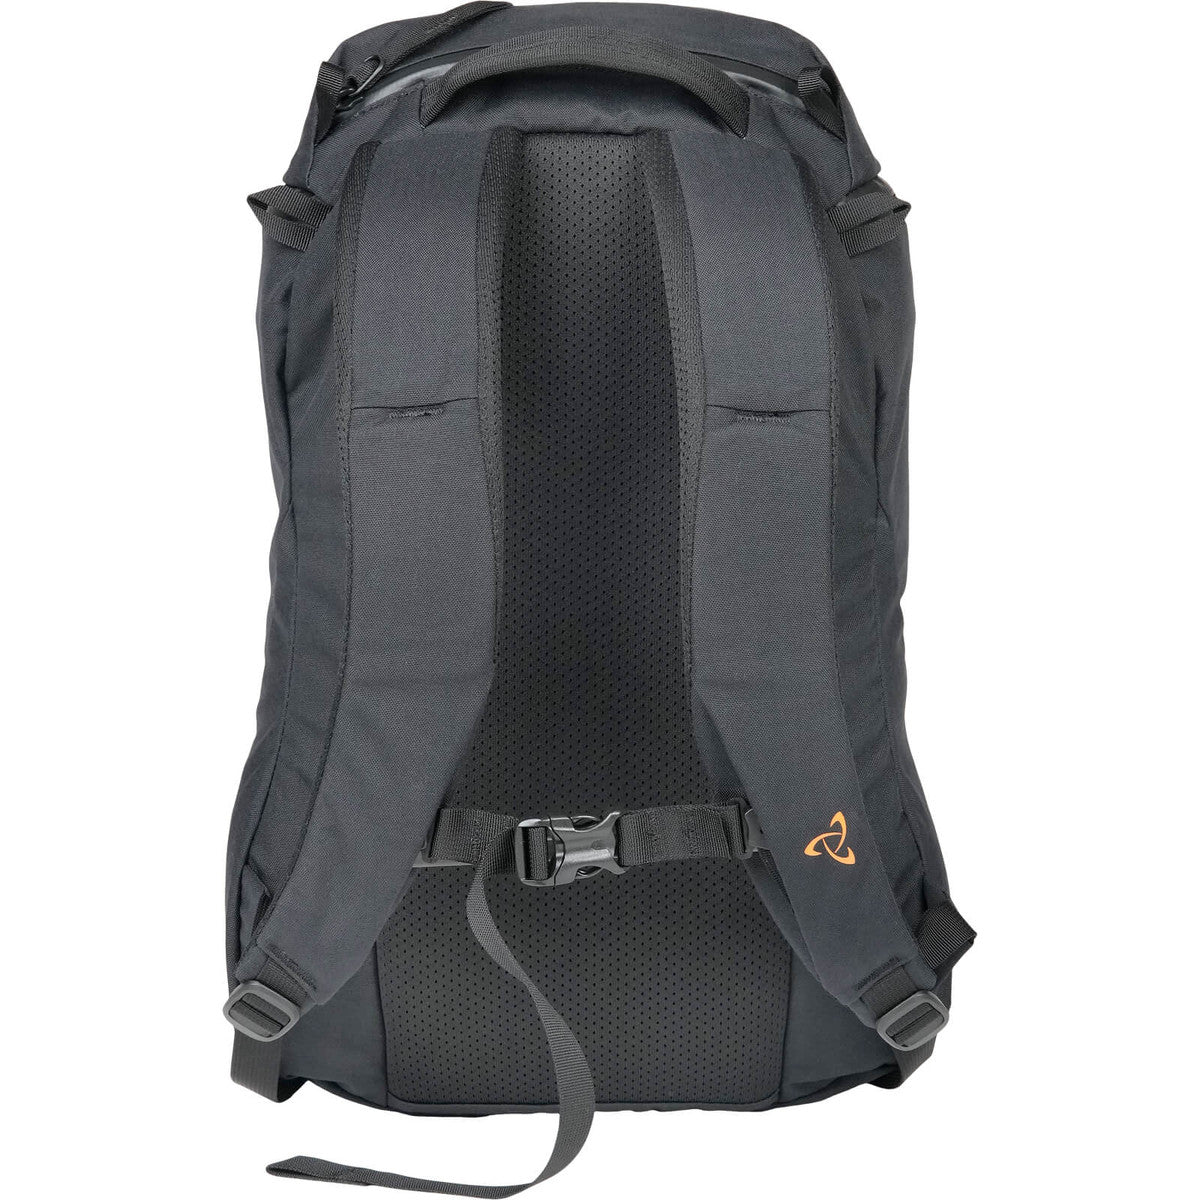 MYSTERY RANCH CATALYST BACKPACK - 18L